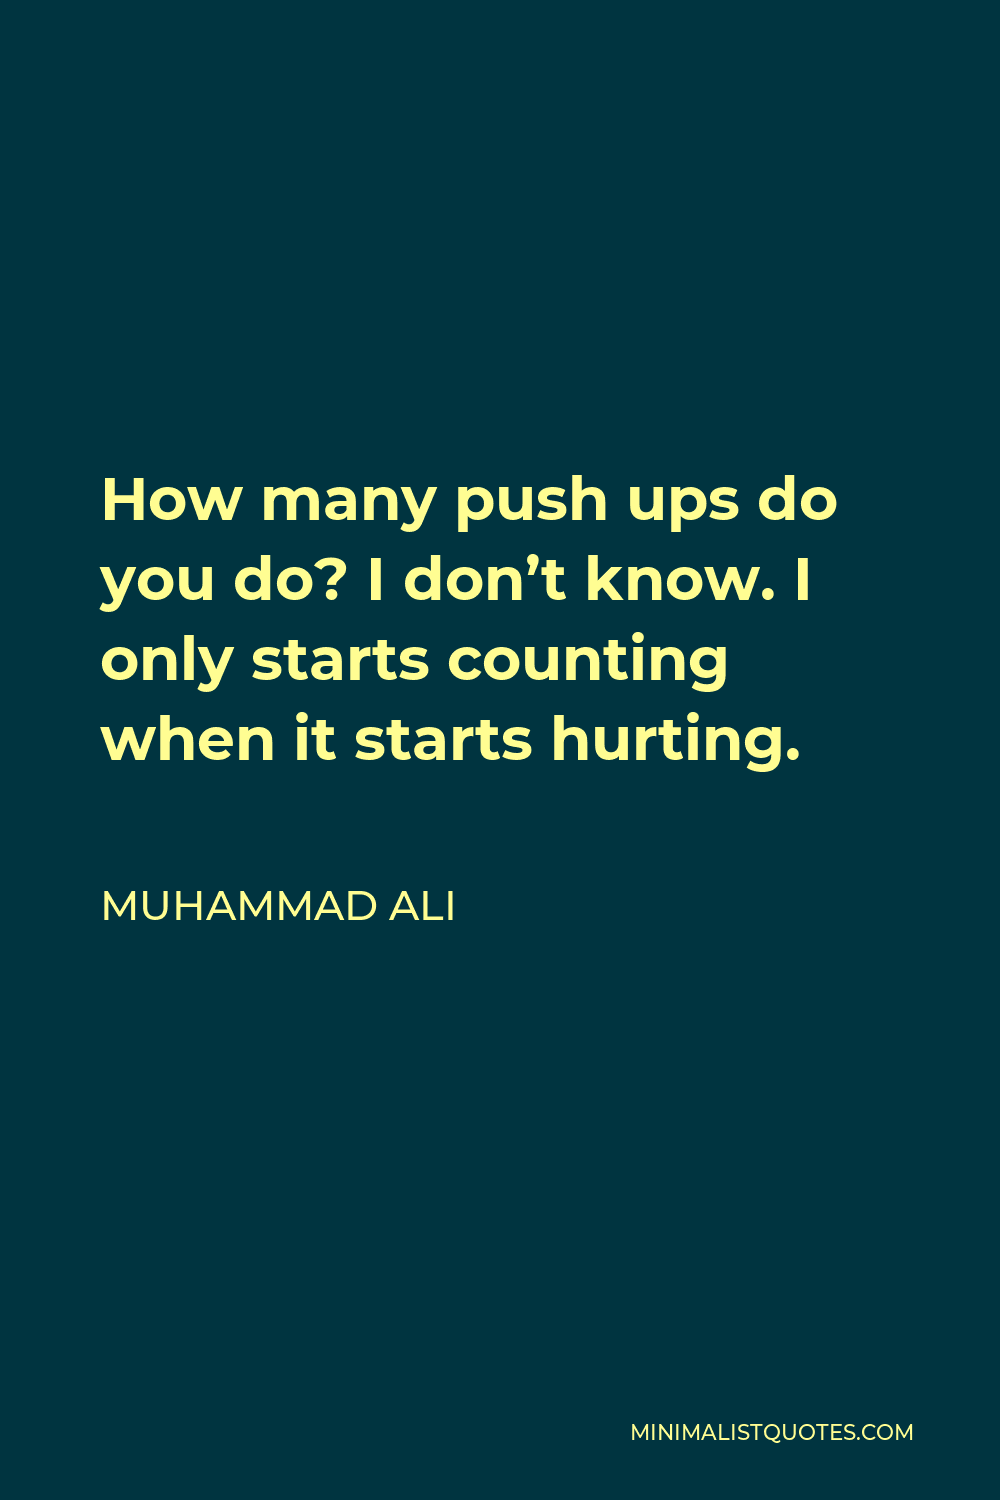 Muhammad Ali Quote - How many push ups do you do? I don’t know. I only starts counting when it starts hurting.